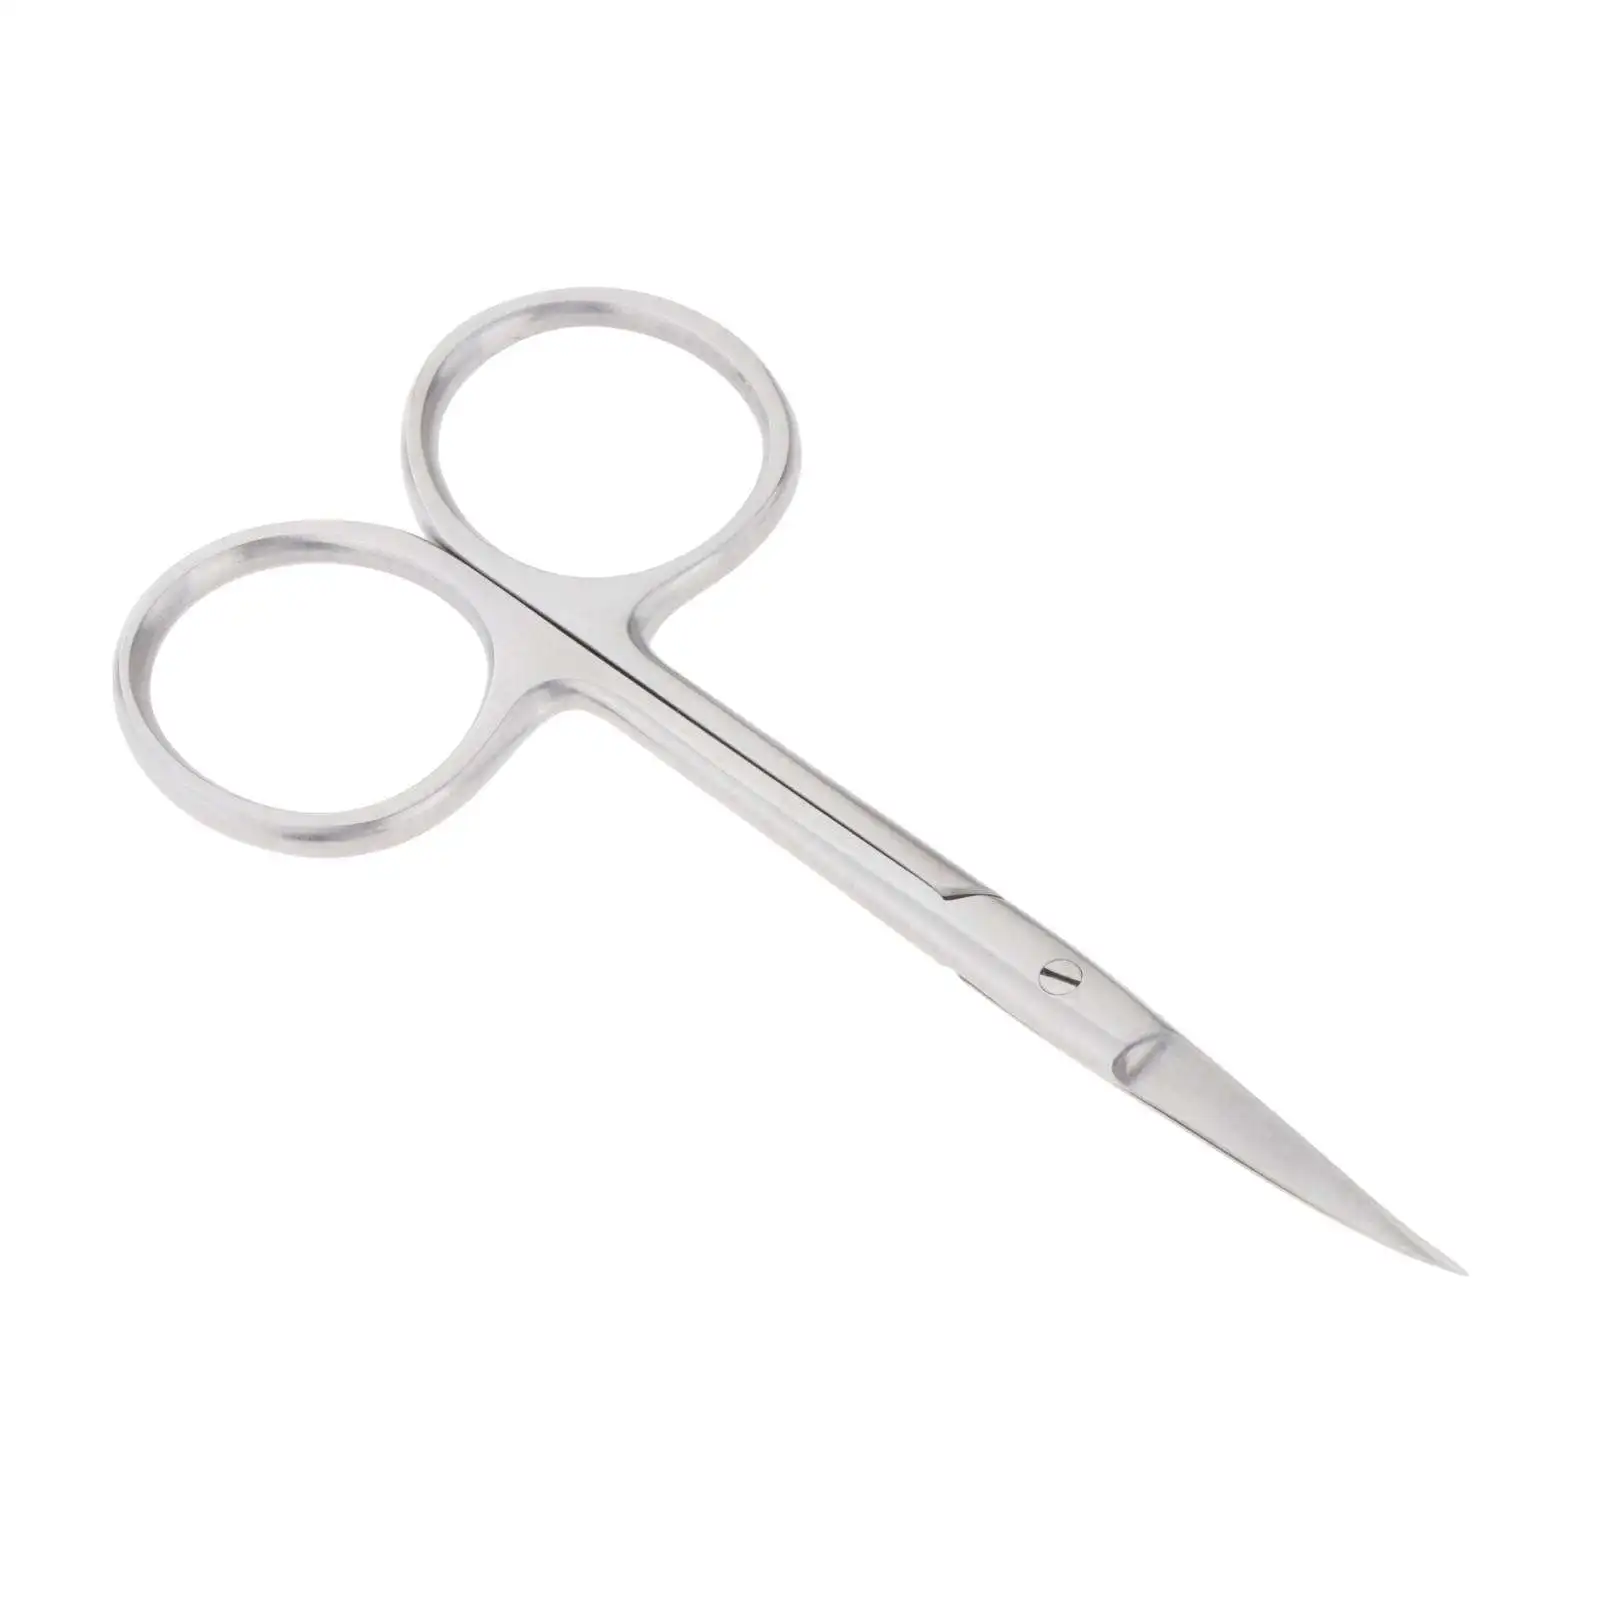 Cuticle Scissors Compact Curved Safety Use Professional Trimming Scissors for Eyelashes Nose Beard Eyebrows Travel Home Use